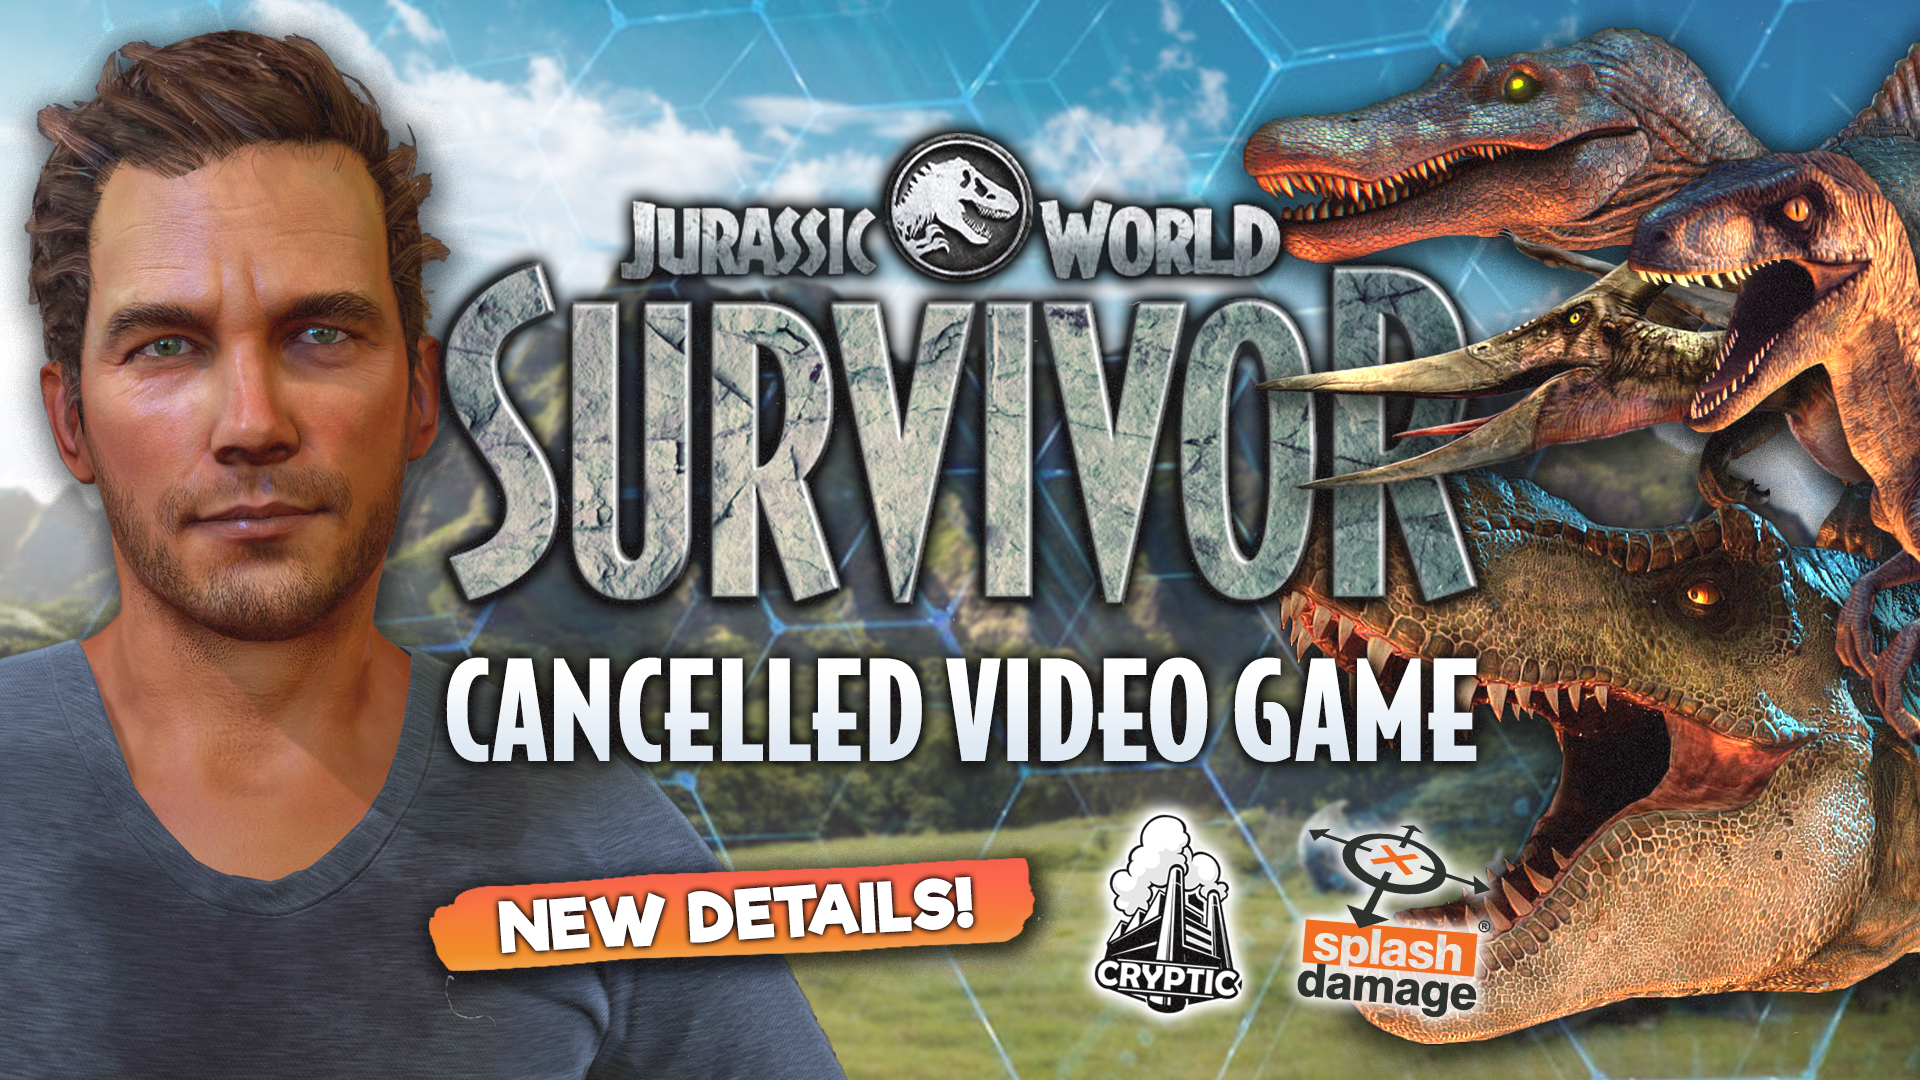 NEW Details from the Cancelled ‘Jurassic World Survivor’ Video Game from Splash Damage